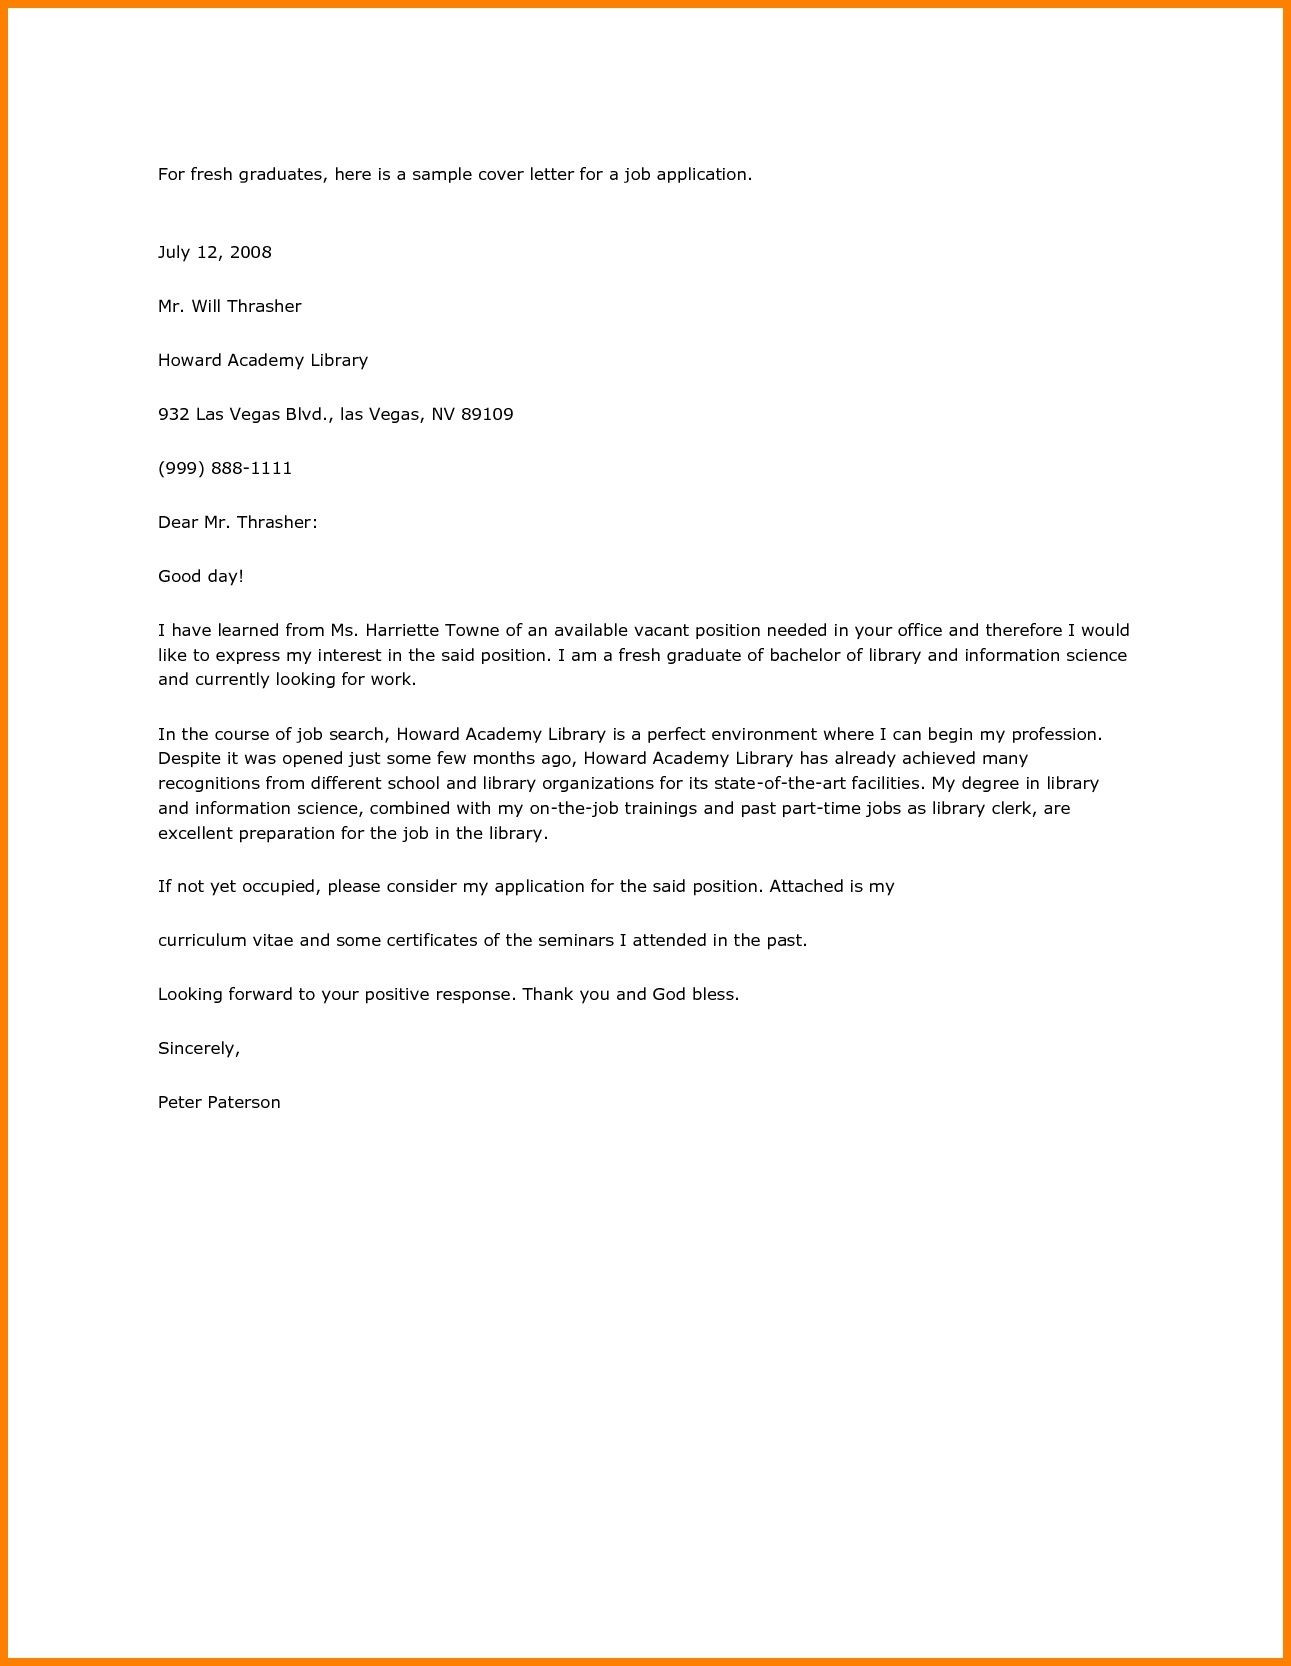 Resume Cover Letter Sample for Fresh Graduate Resume Letter Fresh Graduate Cover Job Application Cool Any Vacant …